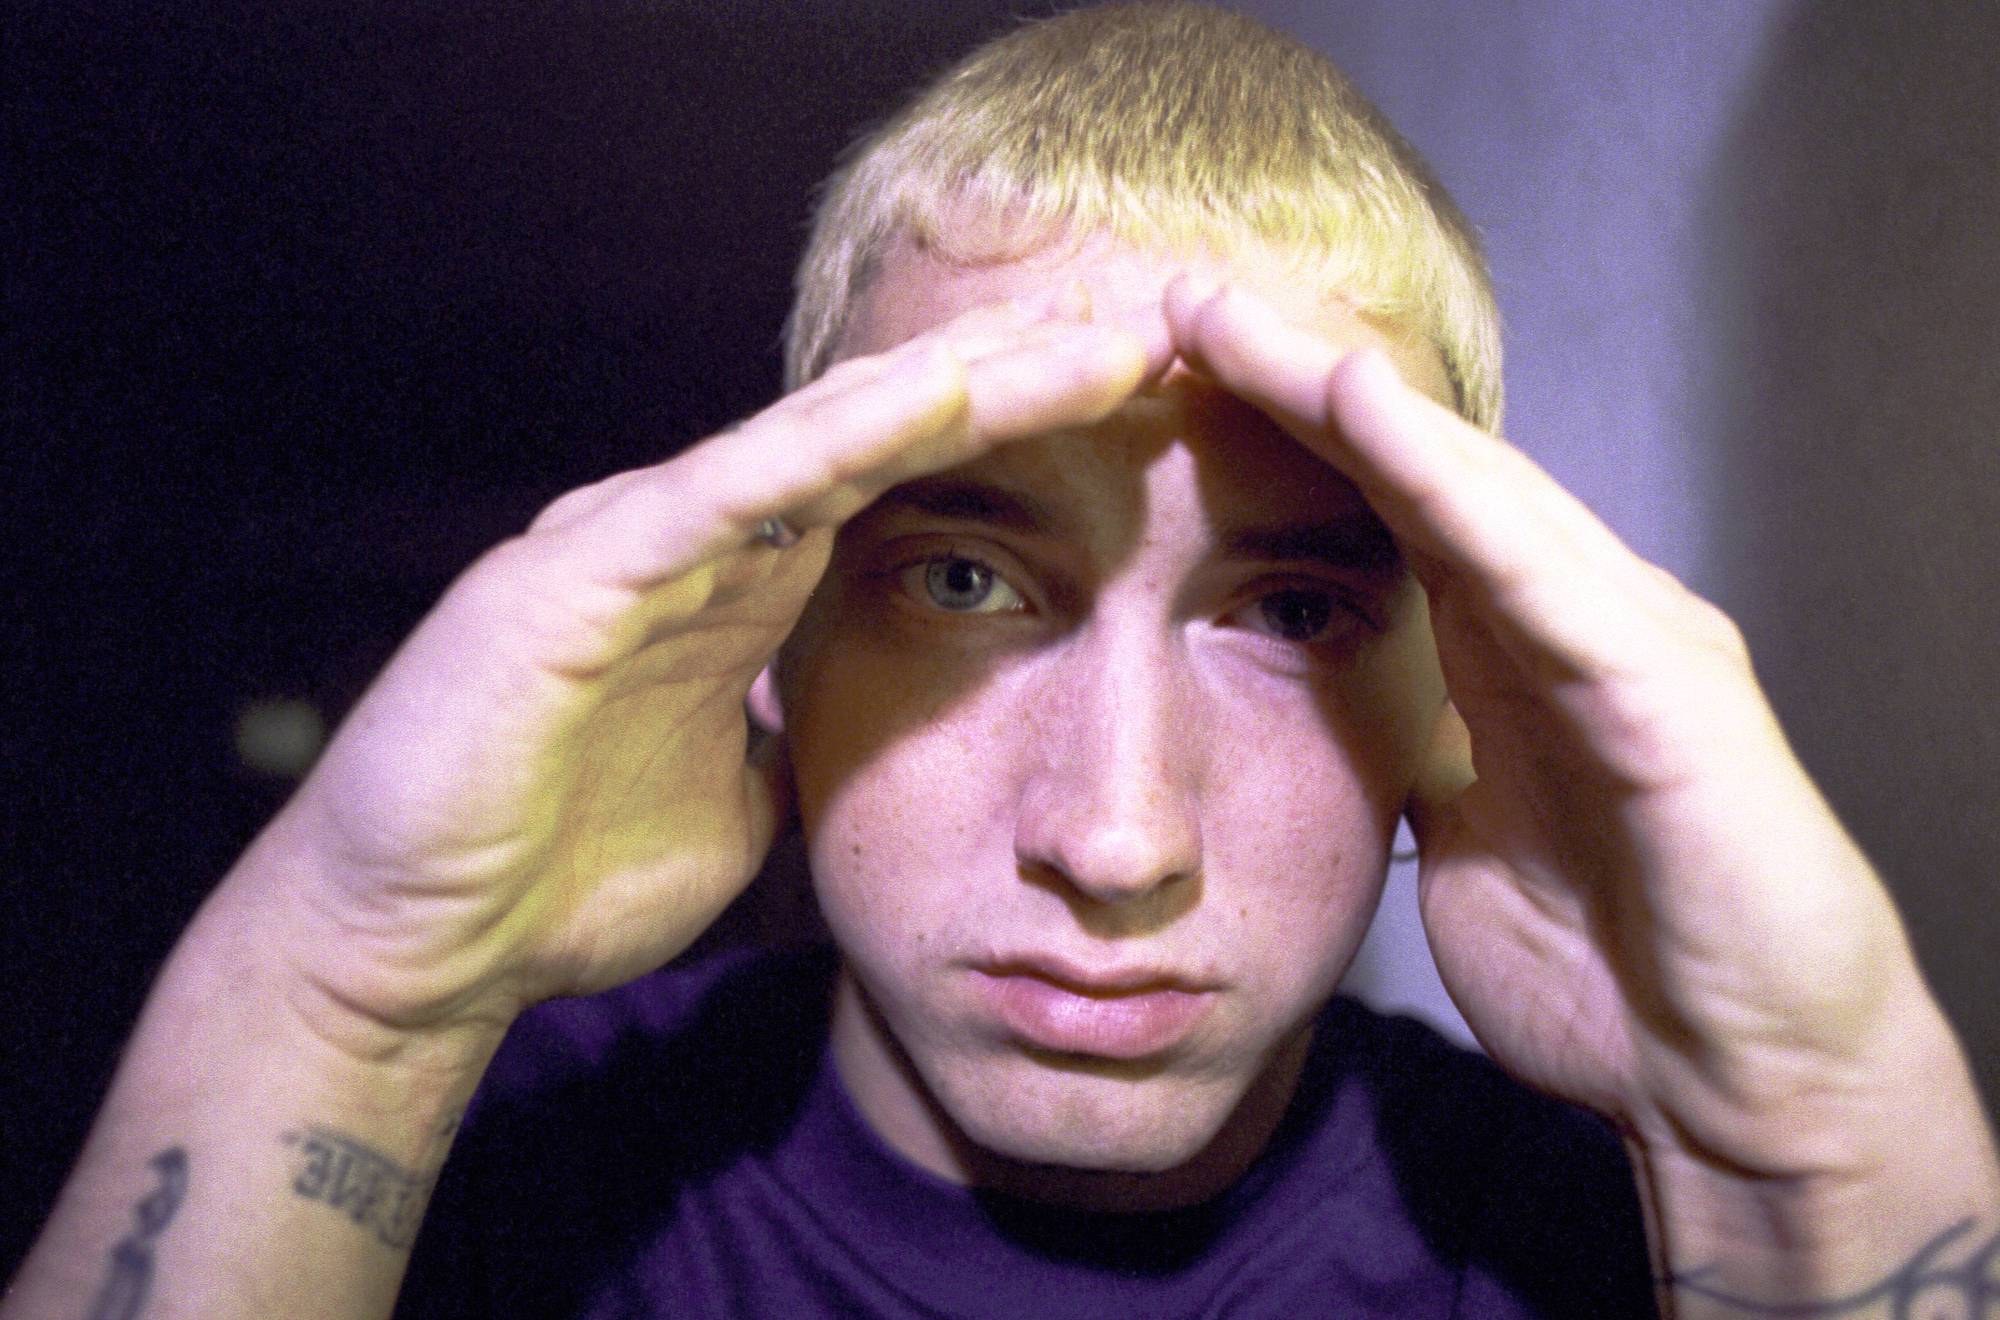 Eminem, who released his debut album 'Infinite' in 1996, posing for a photo